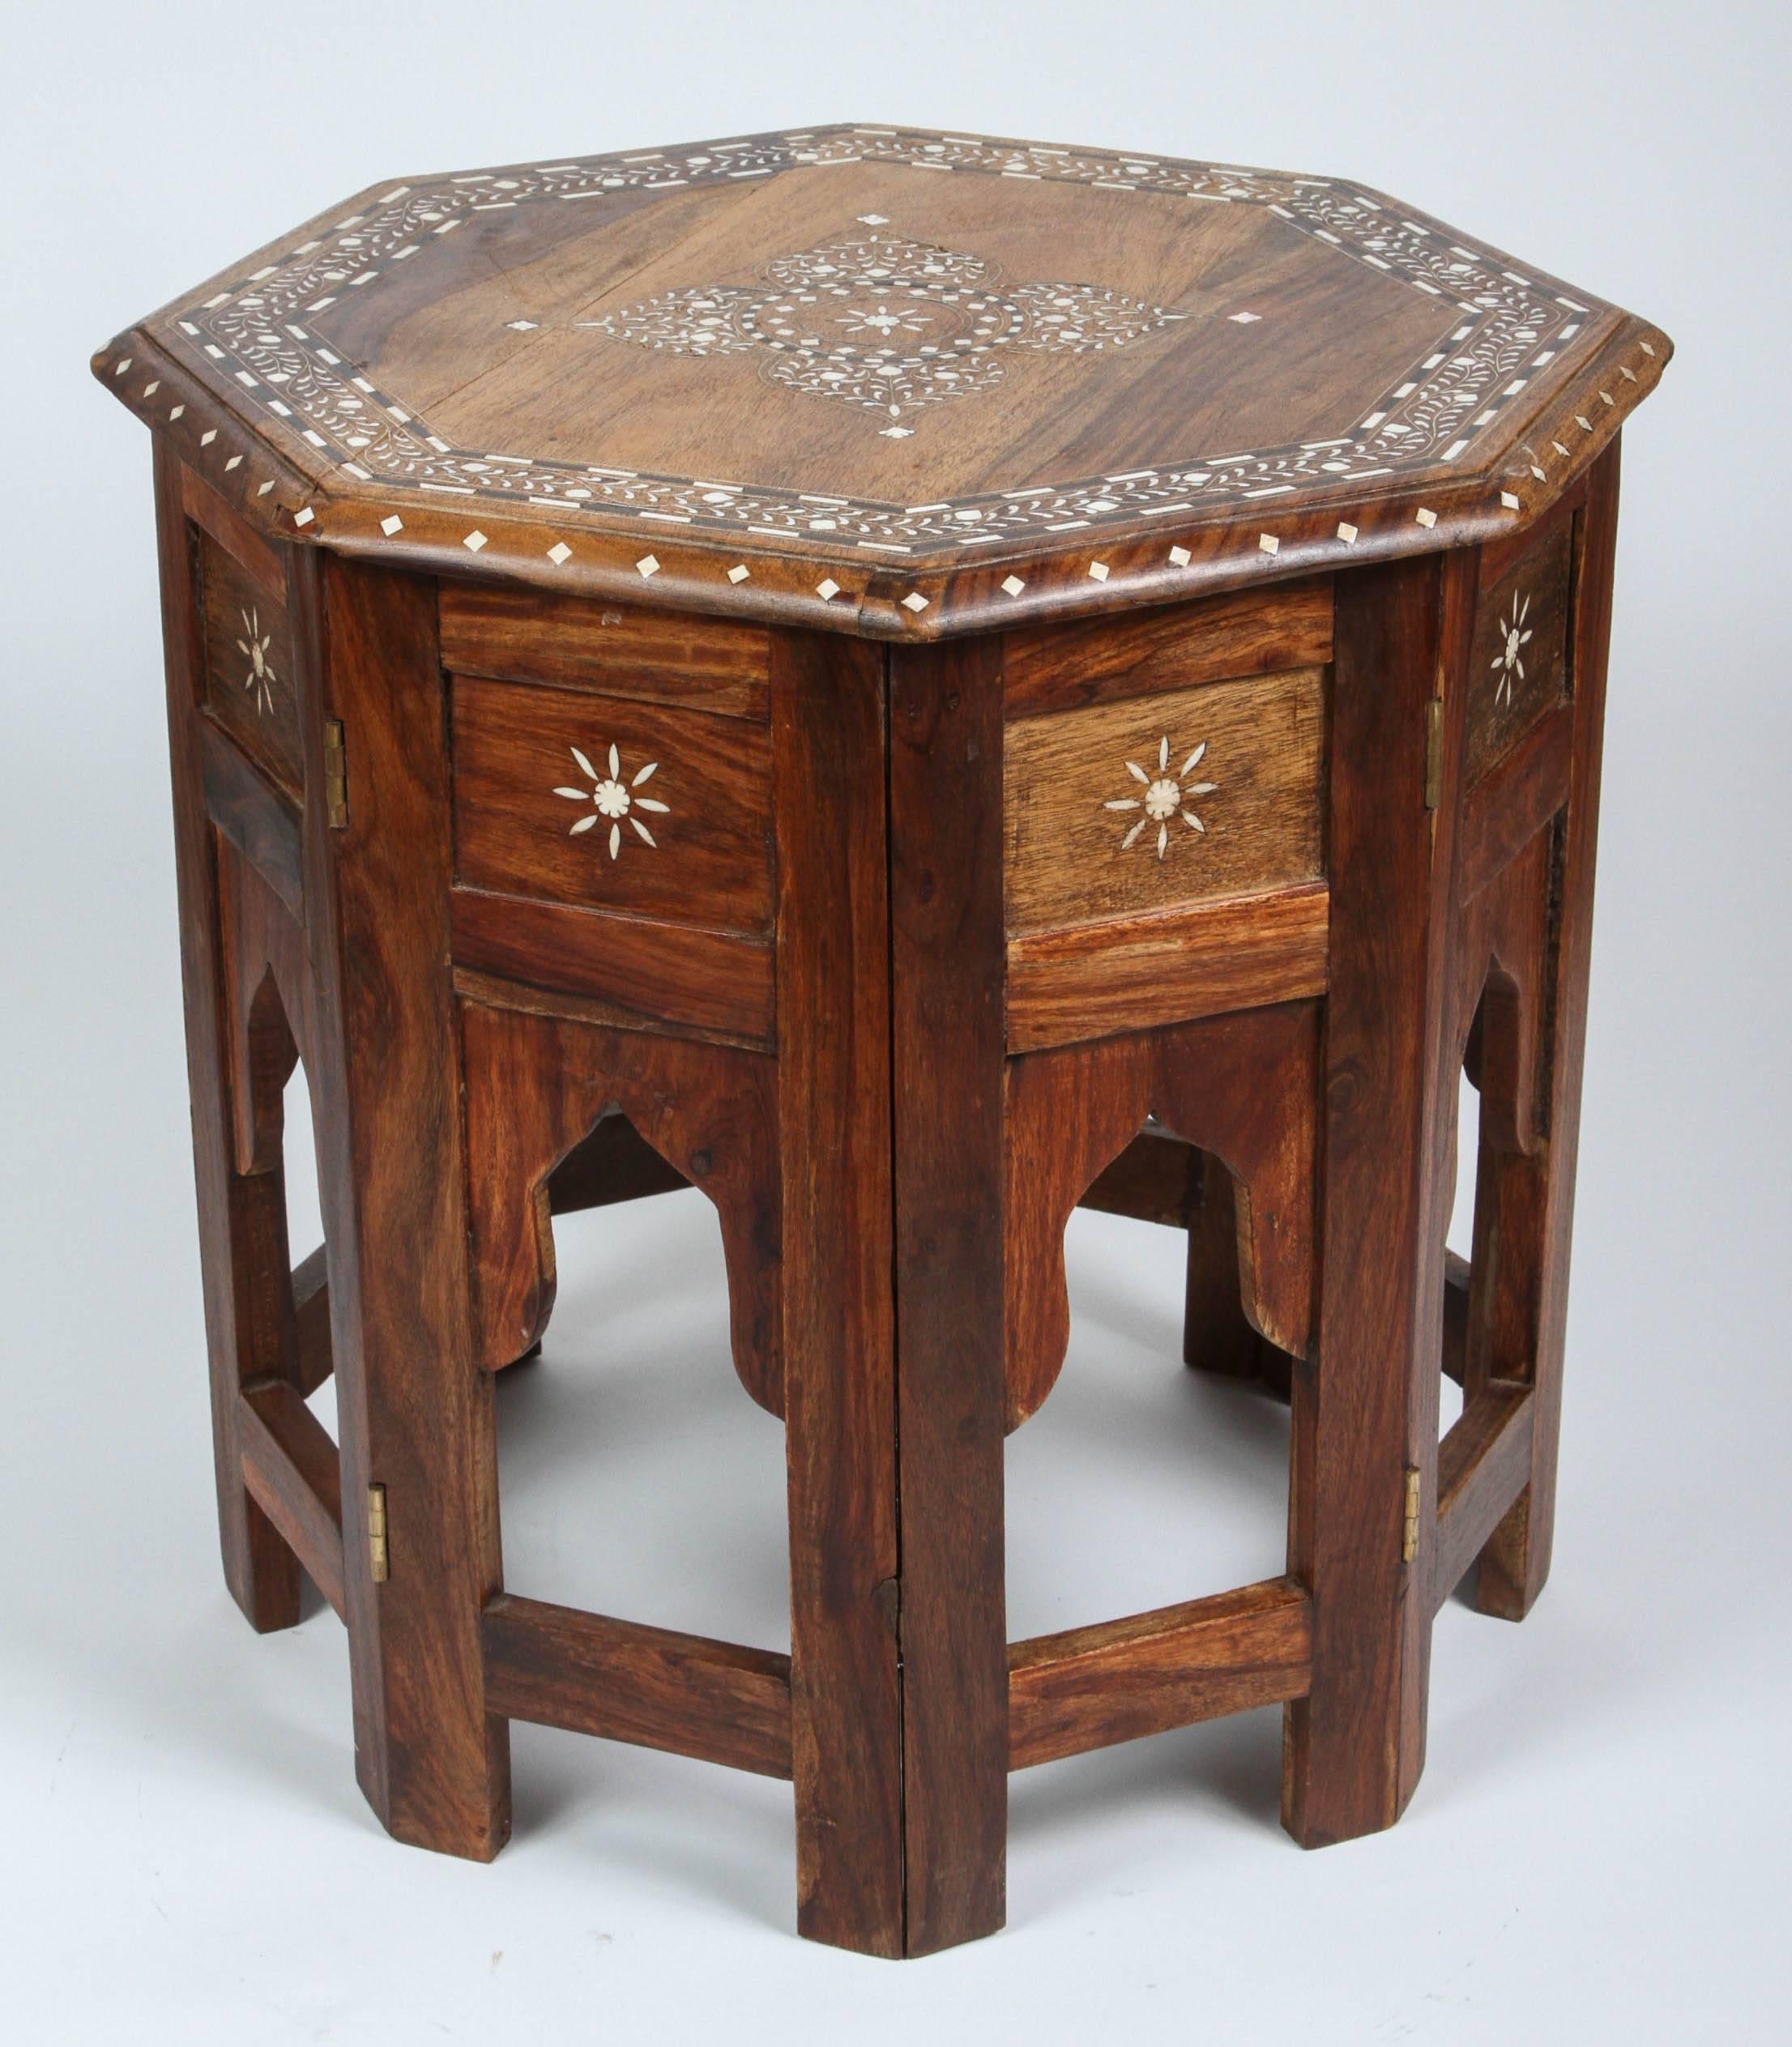 Anglo Indian folding wood bone Inlaid octagonal side Table.
Fine and elegant Moorish octagonal wood table with elaborate bone inlay.
The octagonal surface is finely carved and inlaid with bone details designs in the Mughal style..
The base has